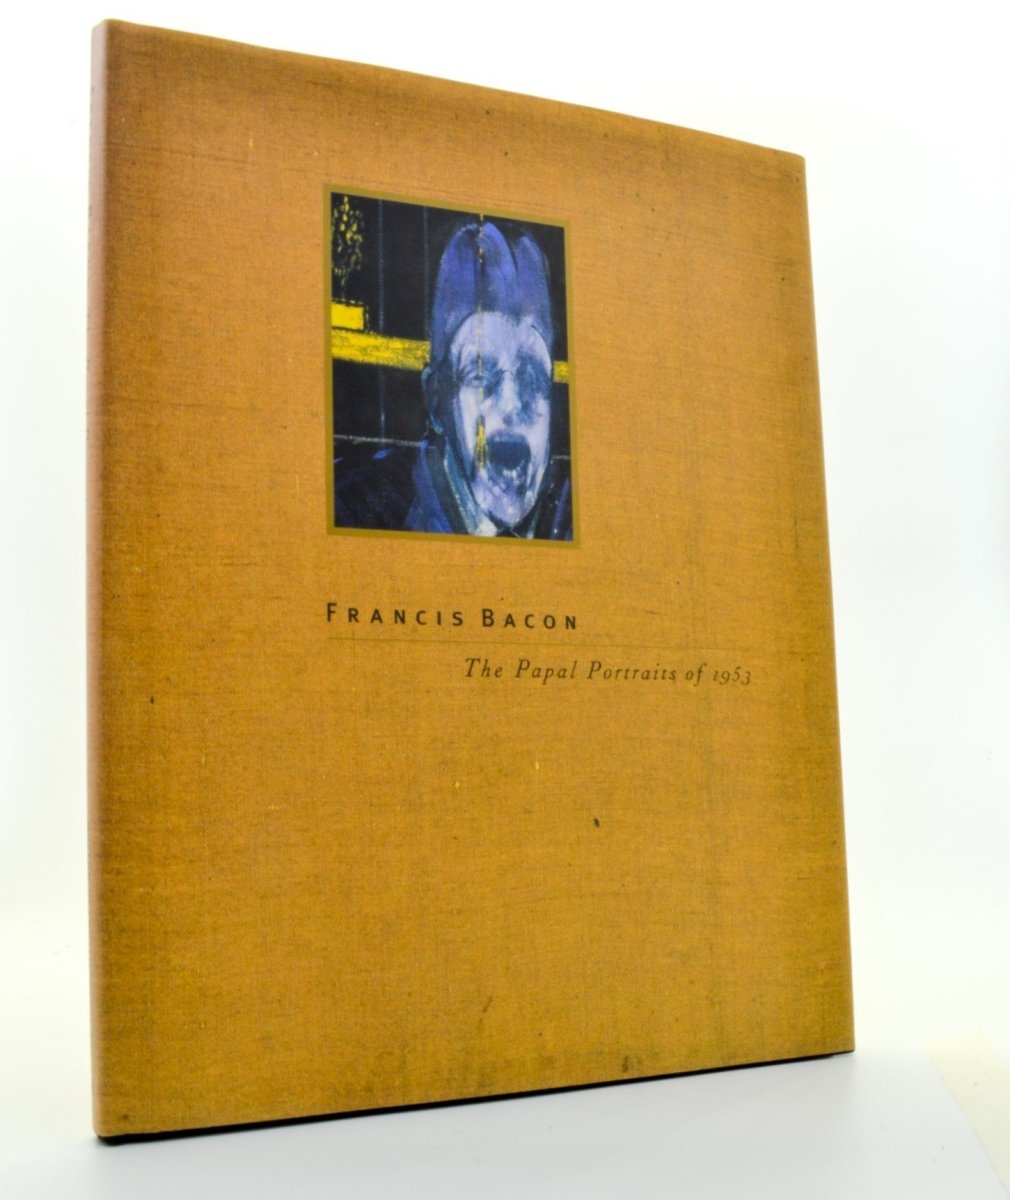 Davies, Hugh M - Francis Bacon The Papal Portraits of 1953 | front cover